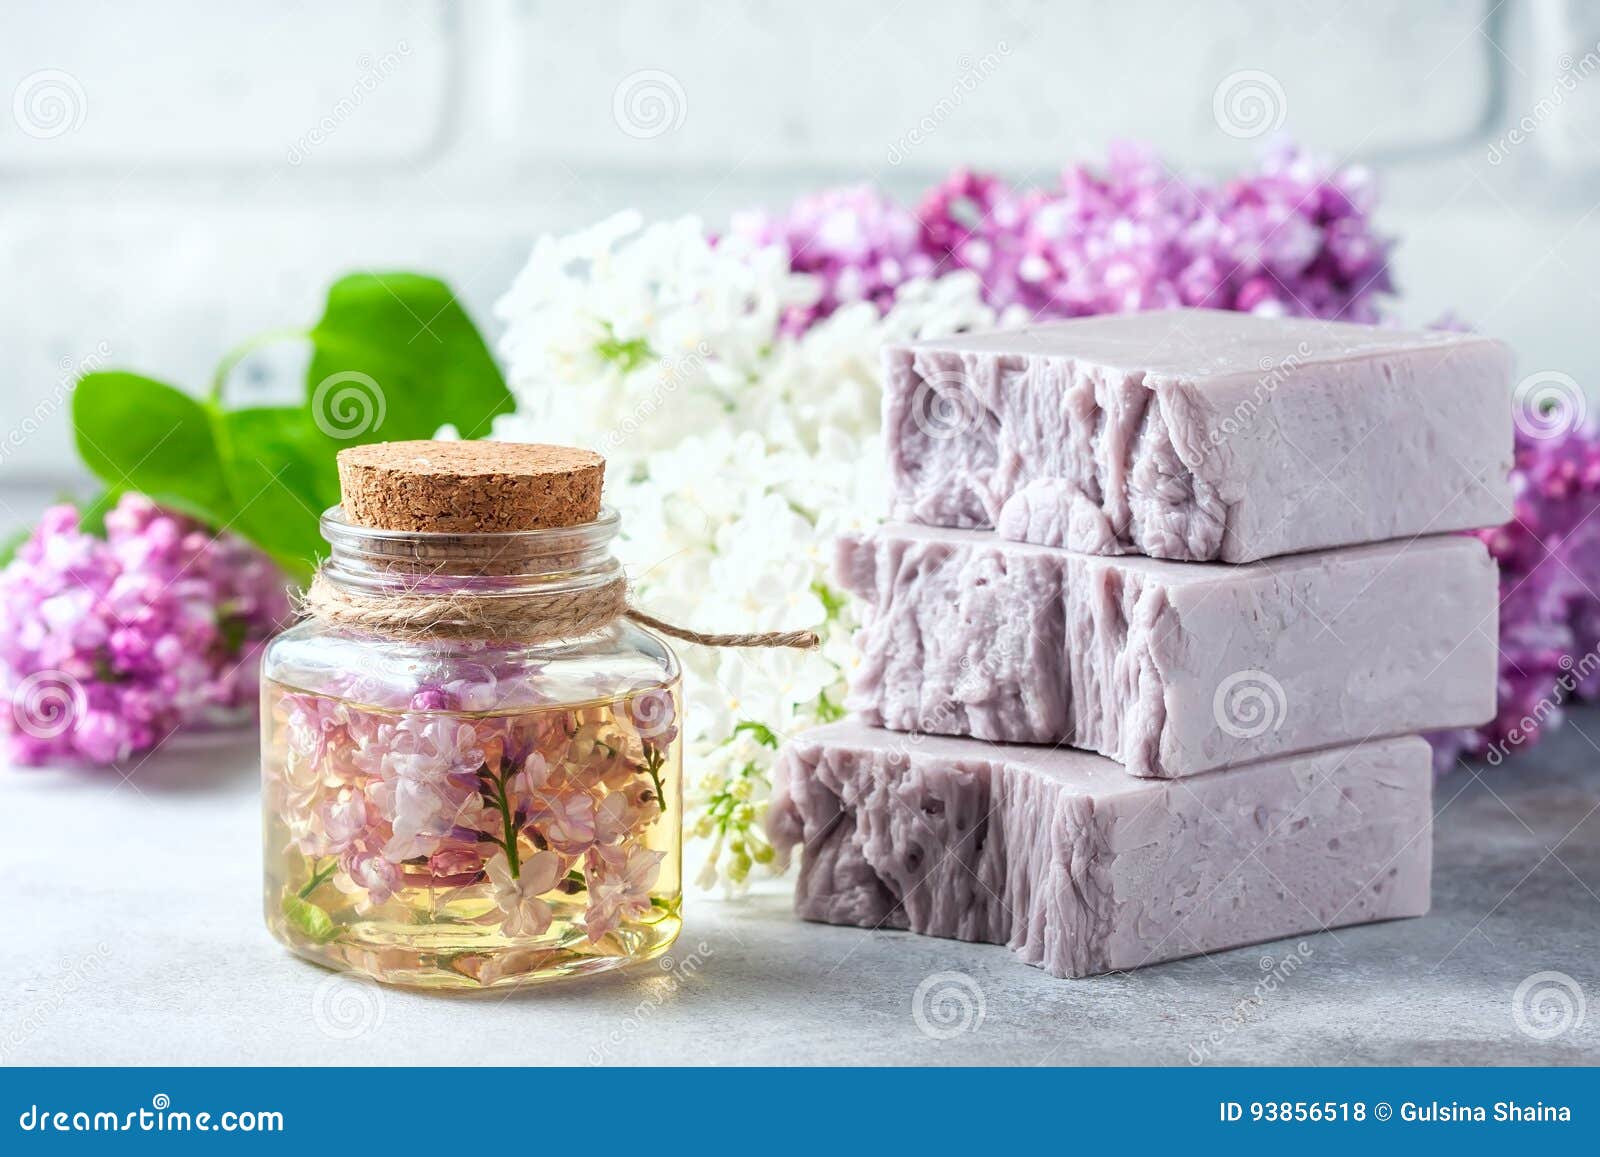 handmade soap, glass jar with fragrant oil and lilac flowers for spa and aromatherapy.